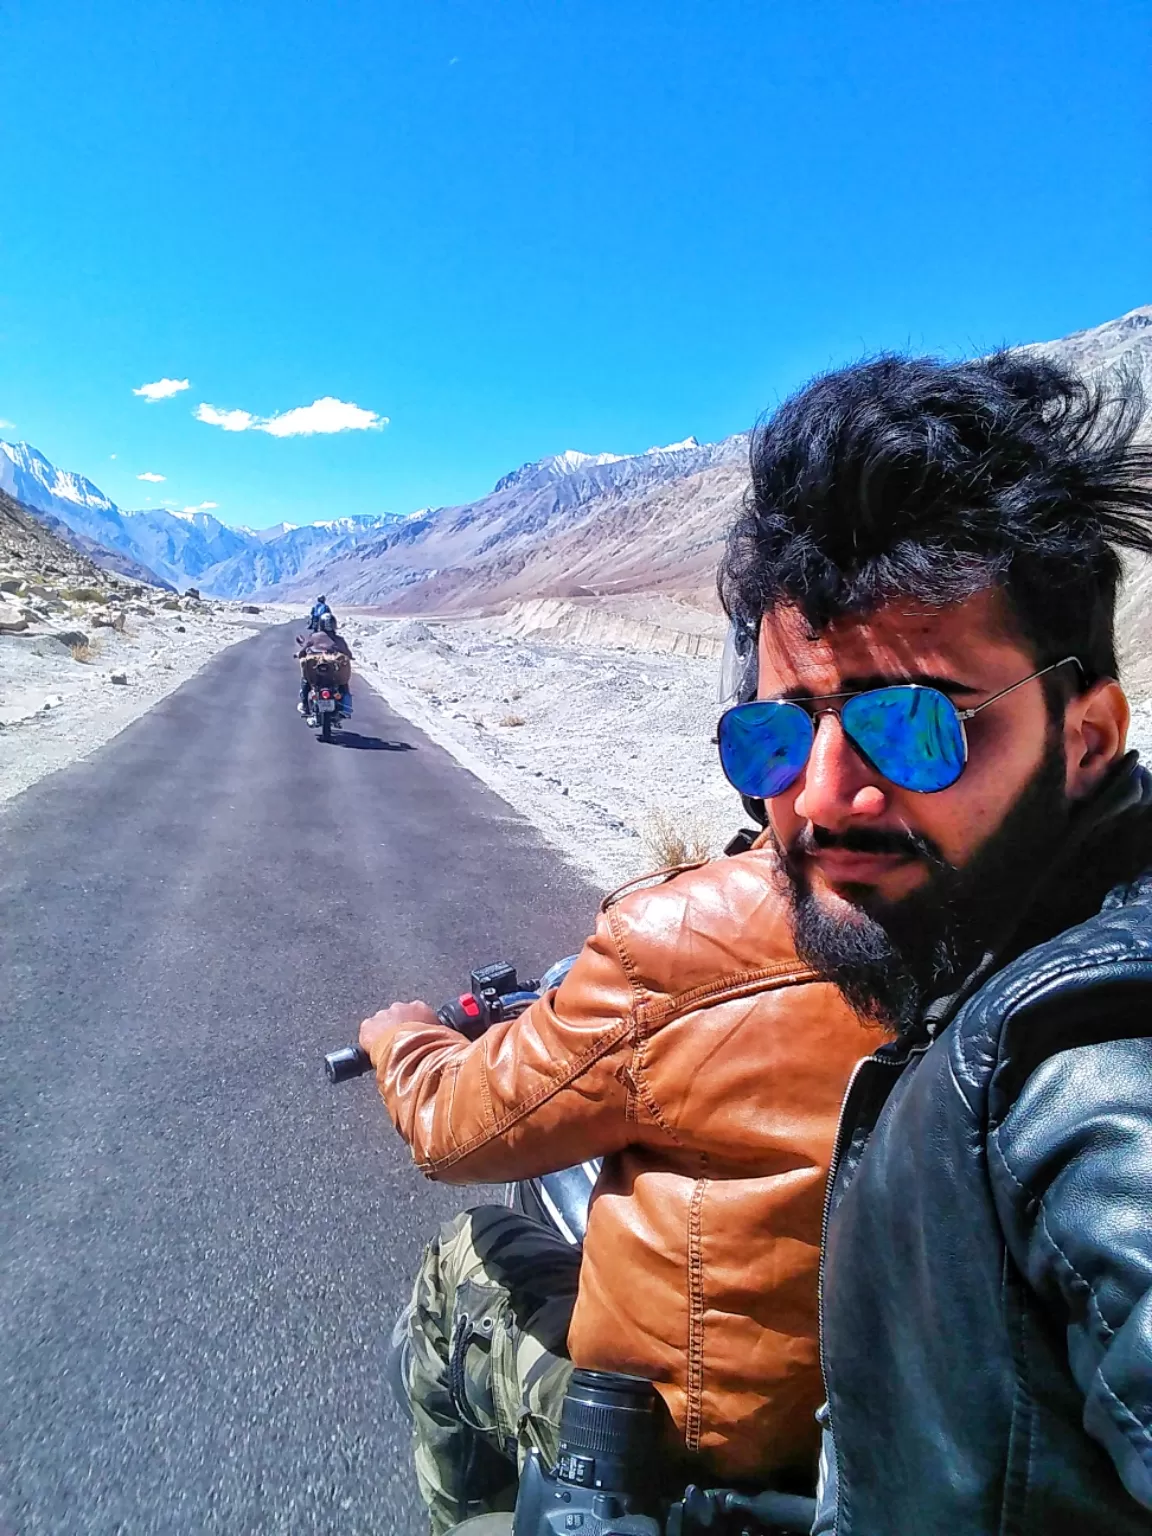 Photo of Leh Ladakh Tours and Travels - Frozen Highway By voyagewithsib